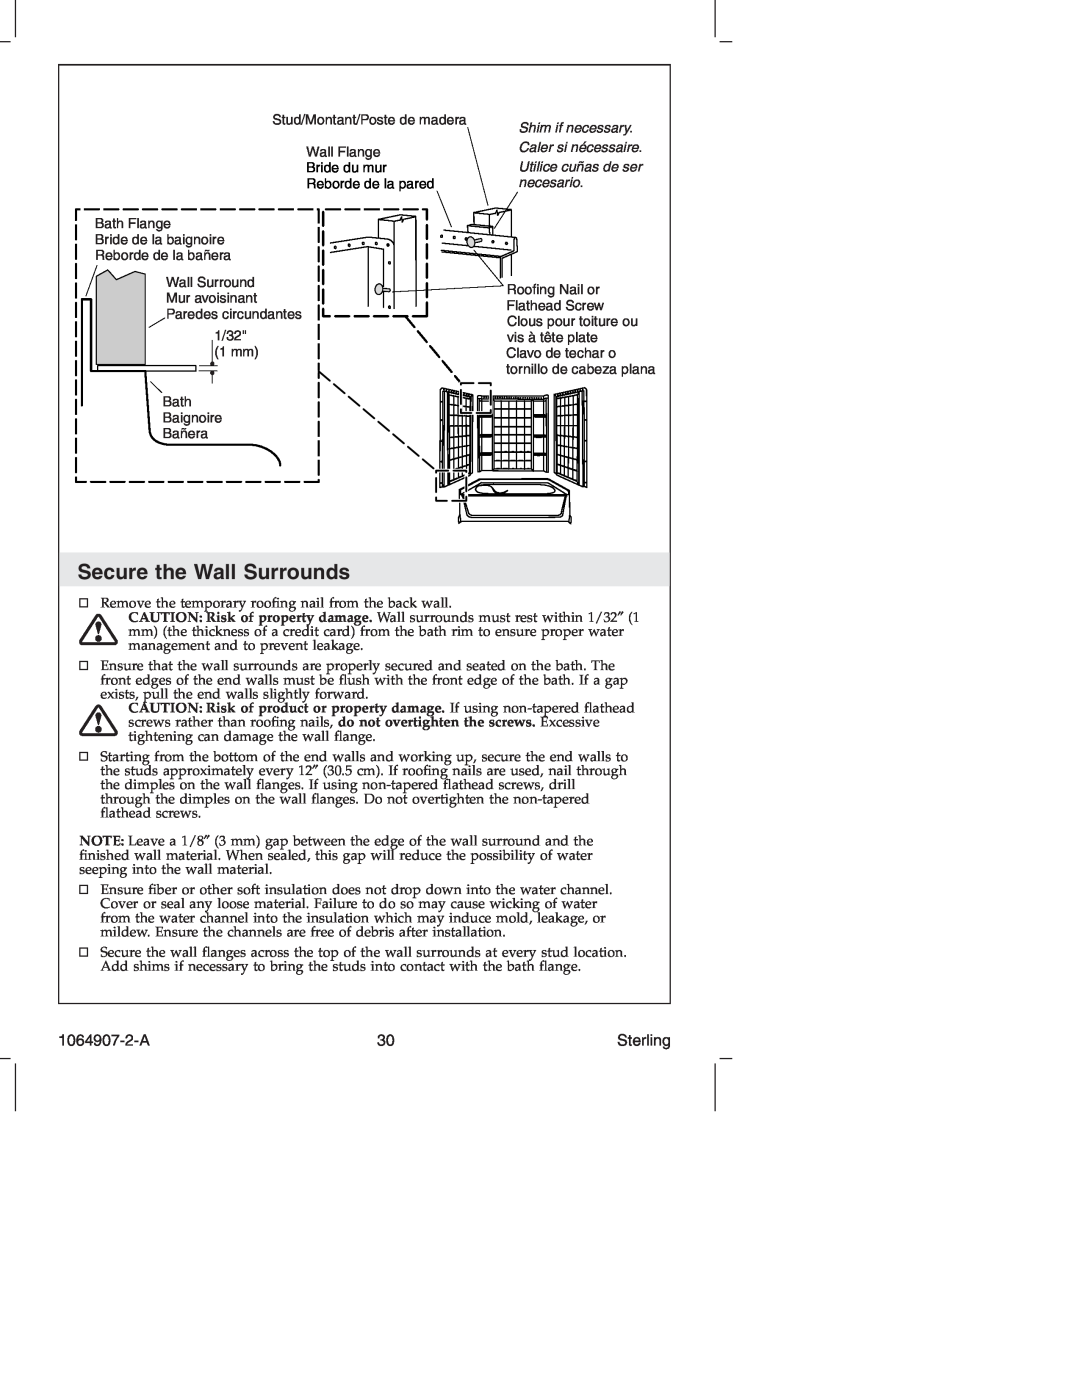 Sterling Plumbing 6103 Series manual Secure the Wall Surrounds, 1064907-2-A, Shim if necessary, necesario 